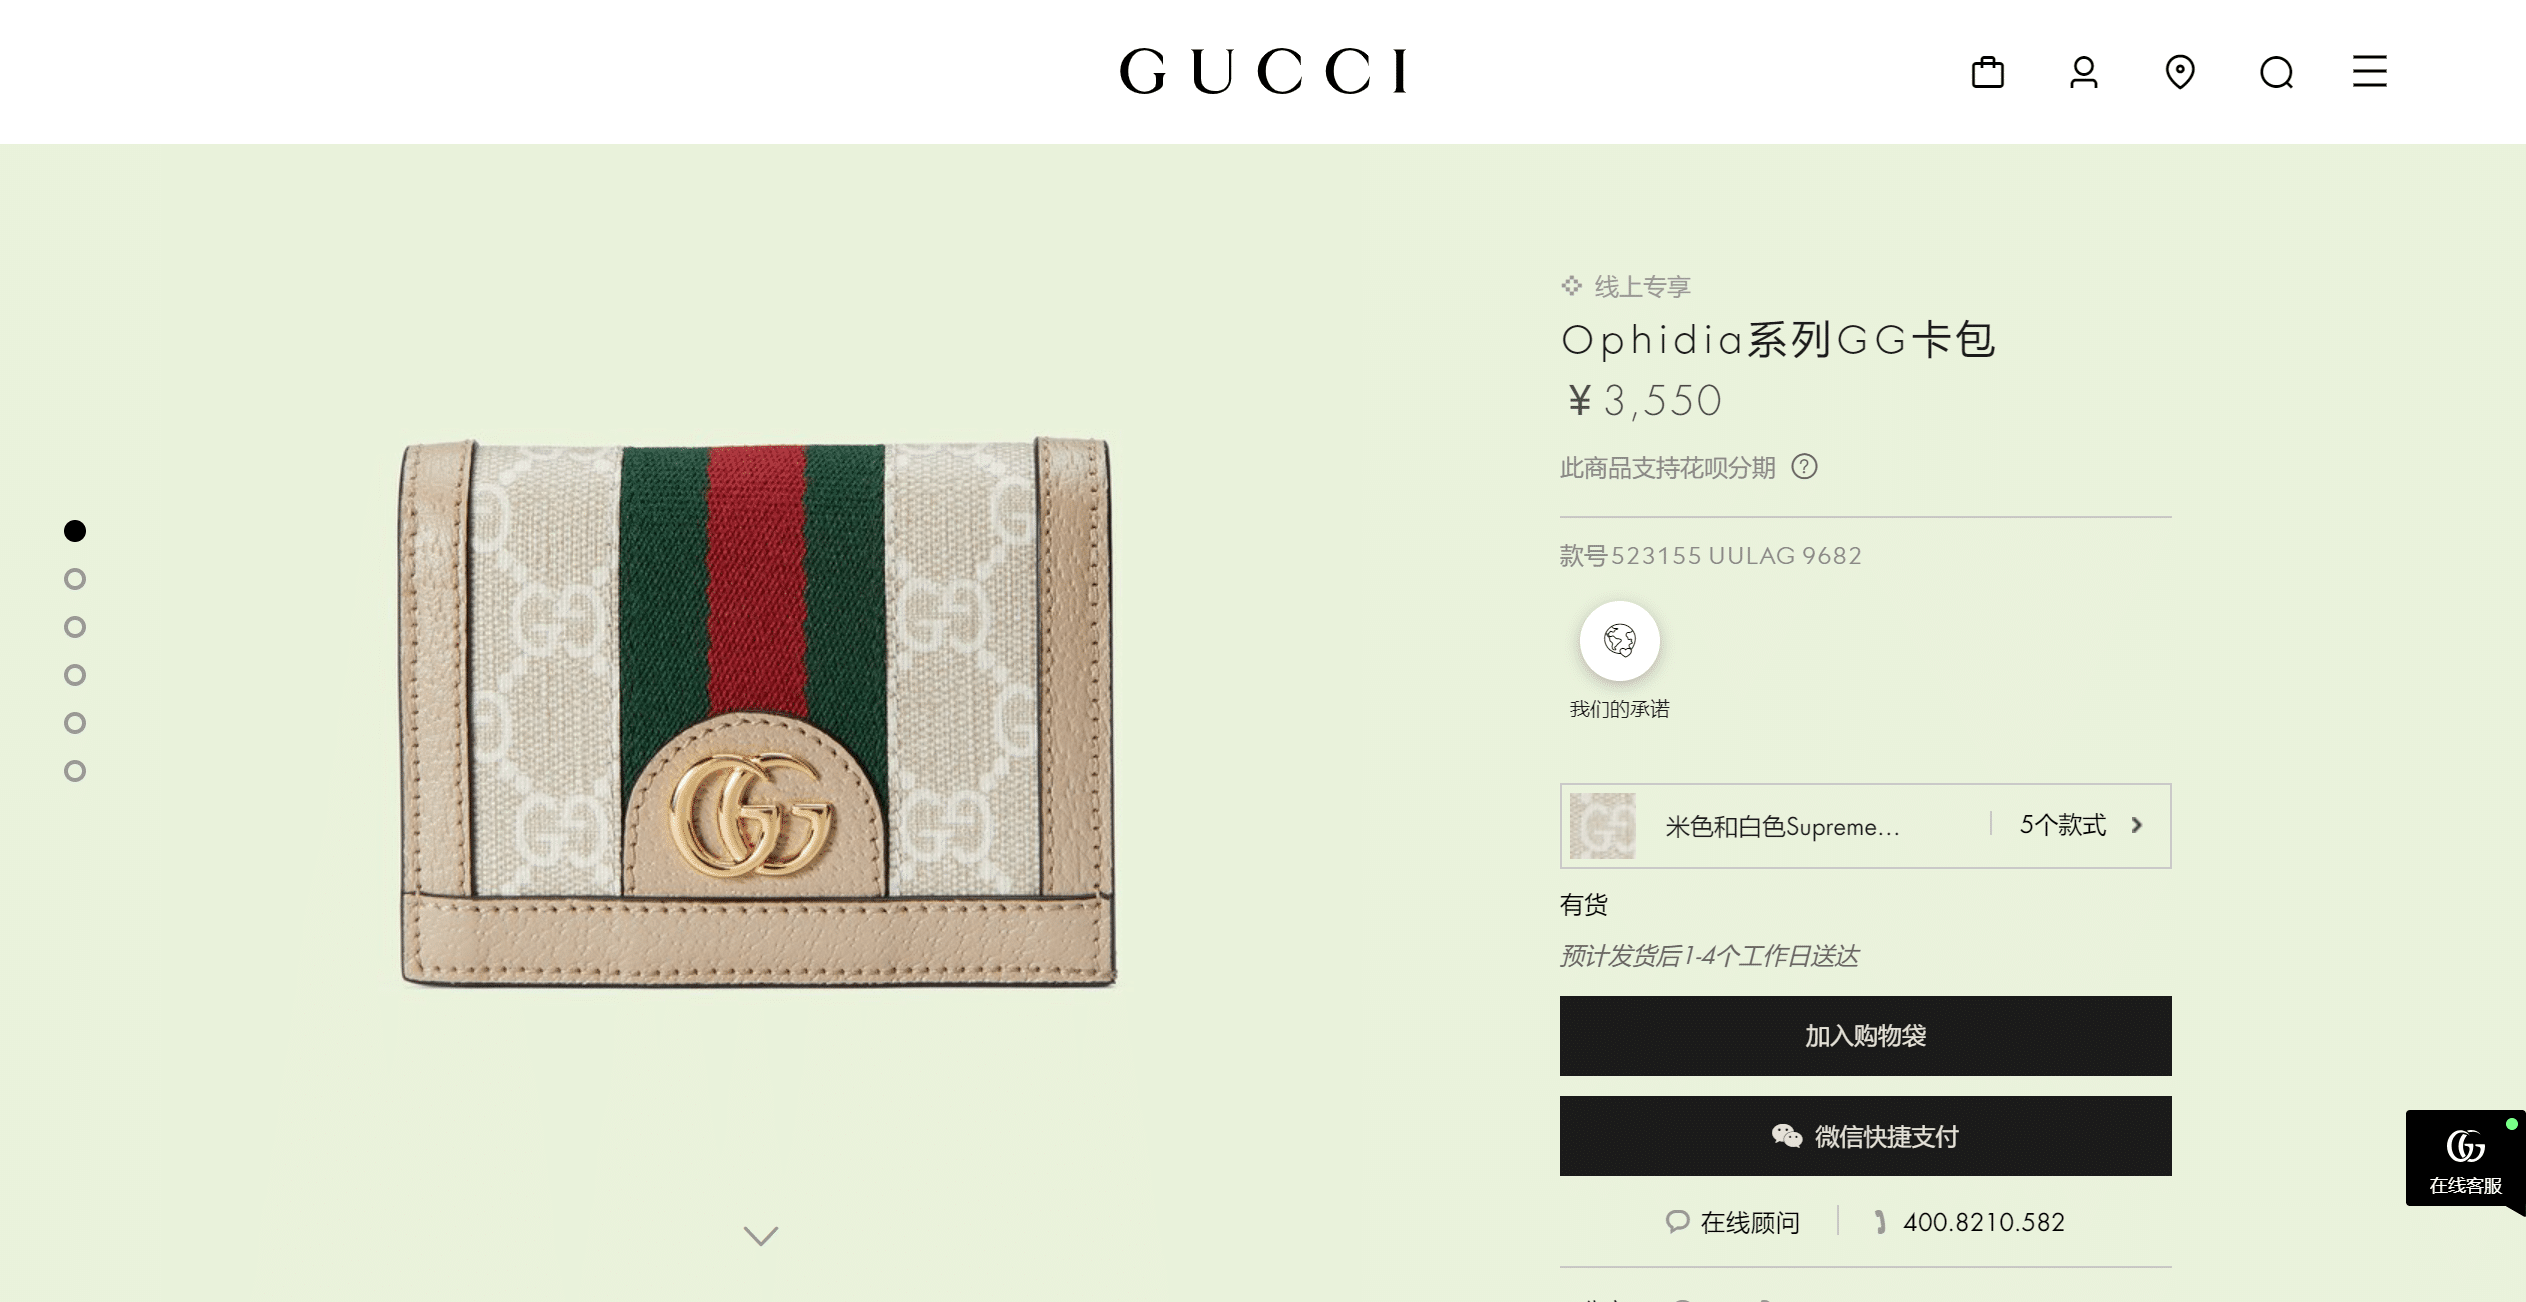 Supreme-OphidiaGG-GUCCI.png